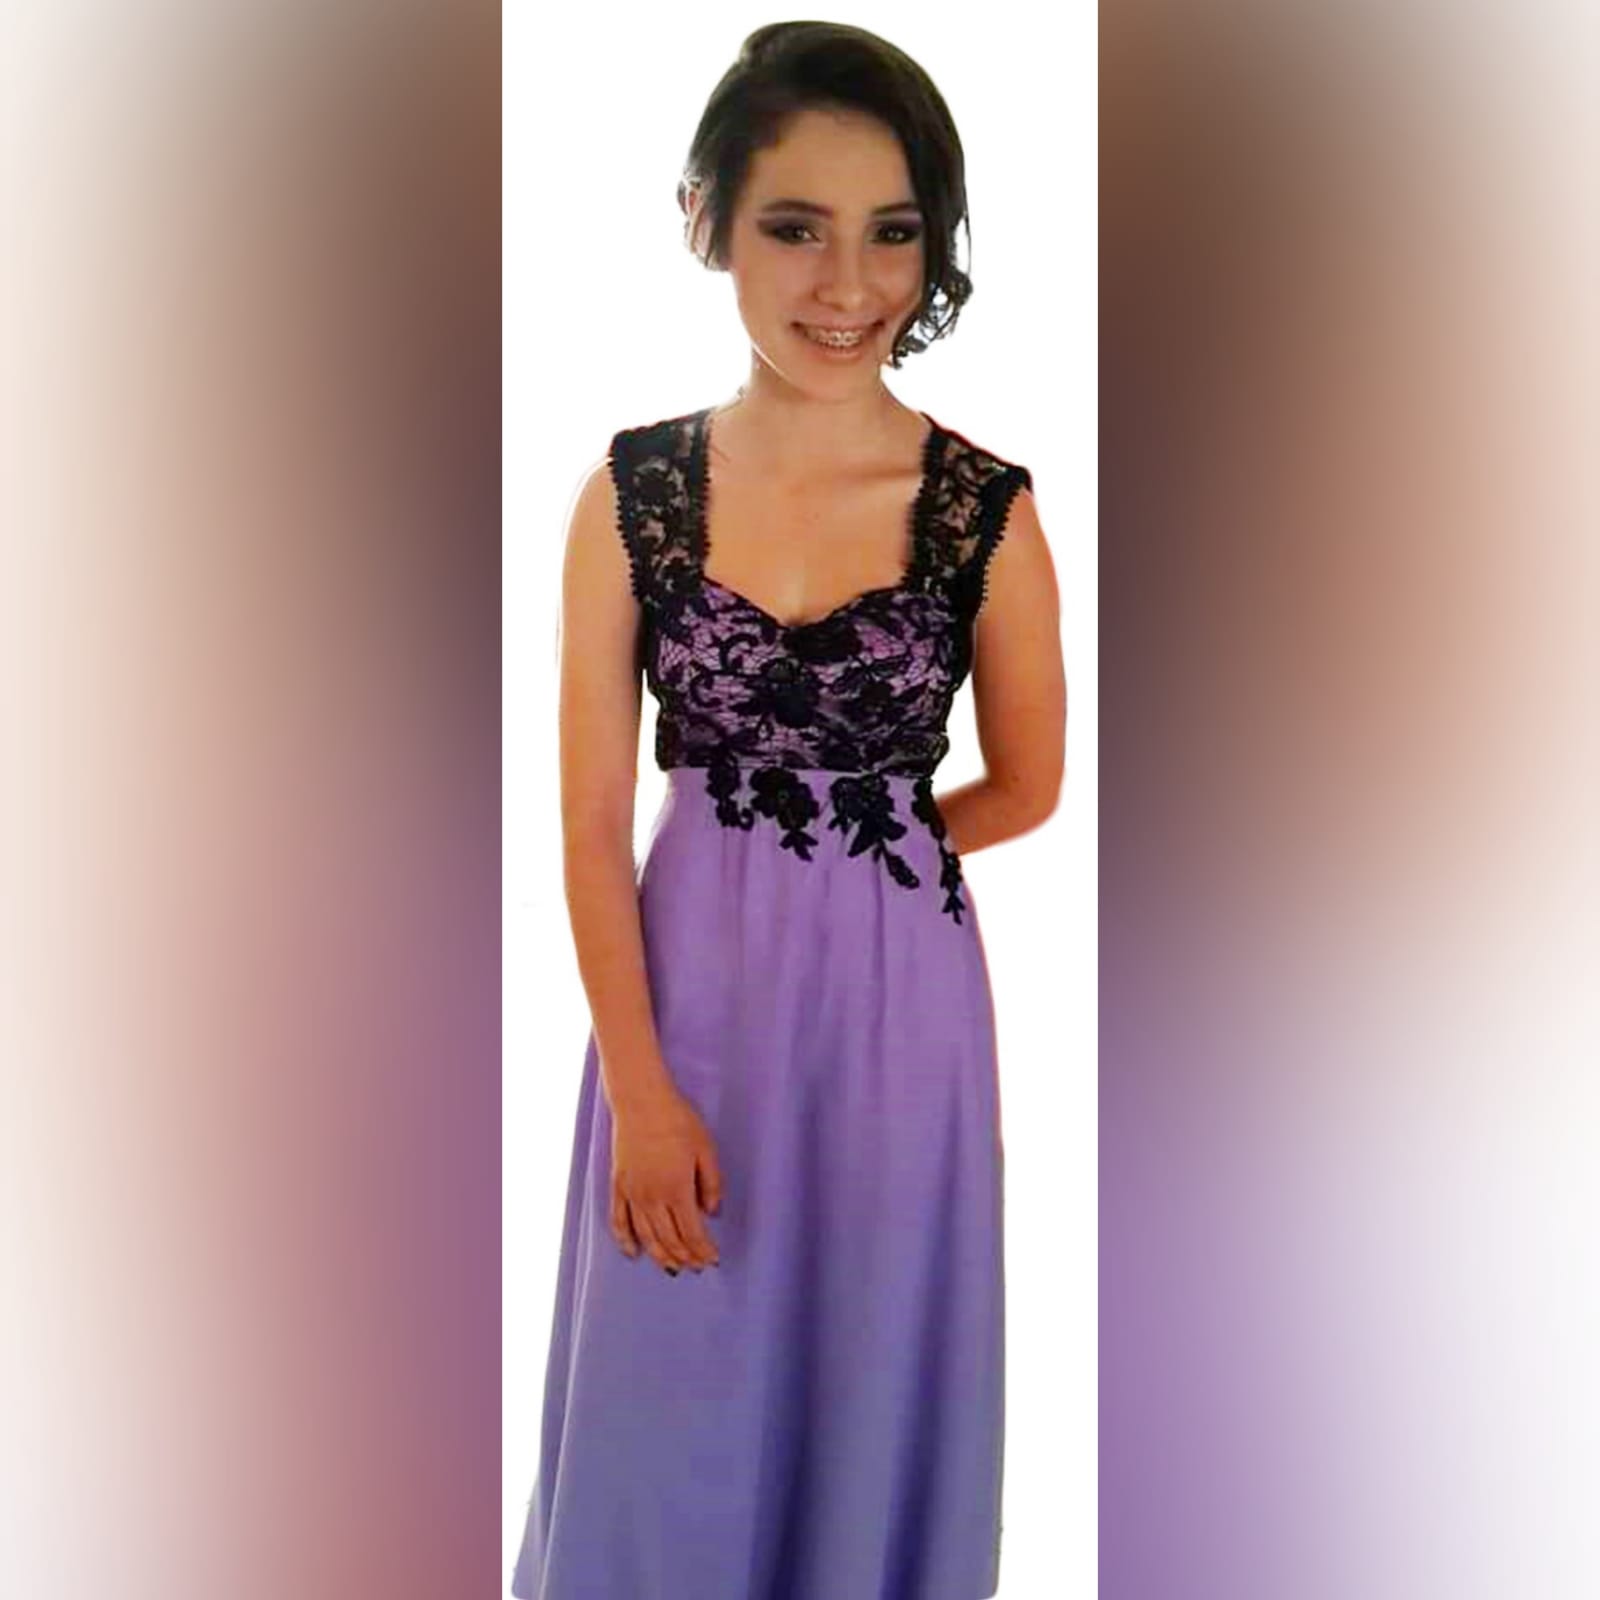 Lilac and black lace prom dress 6 lilac and black lace prom dress. Bodice with applique lace and a sweetheart neckline. With sheer lace shoulder straps and sheer lace on the back. Long and flowy prom dress.